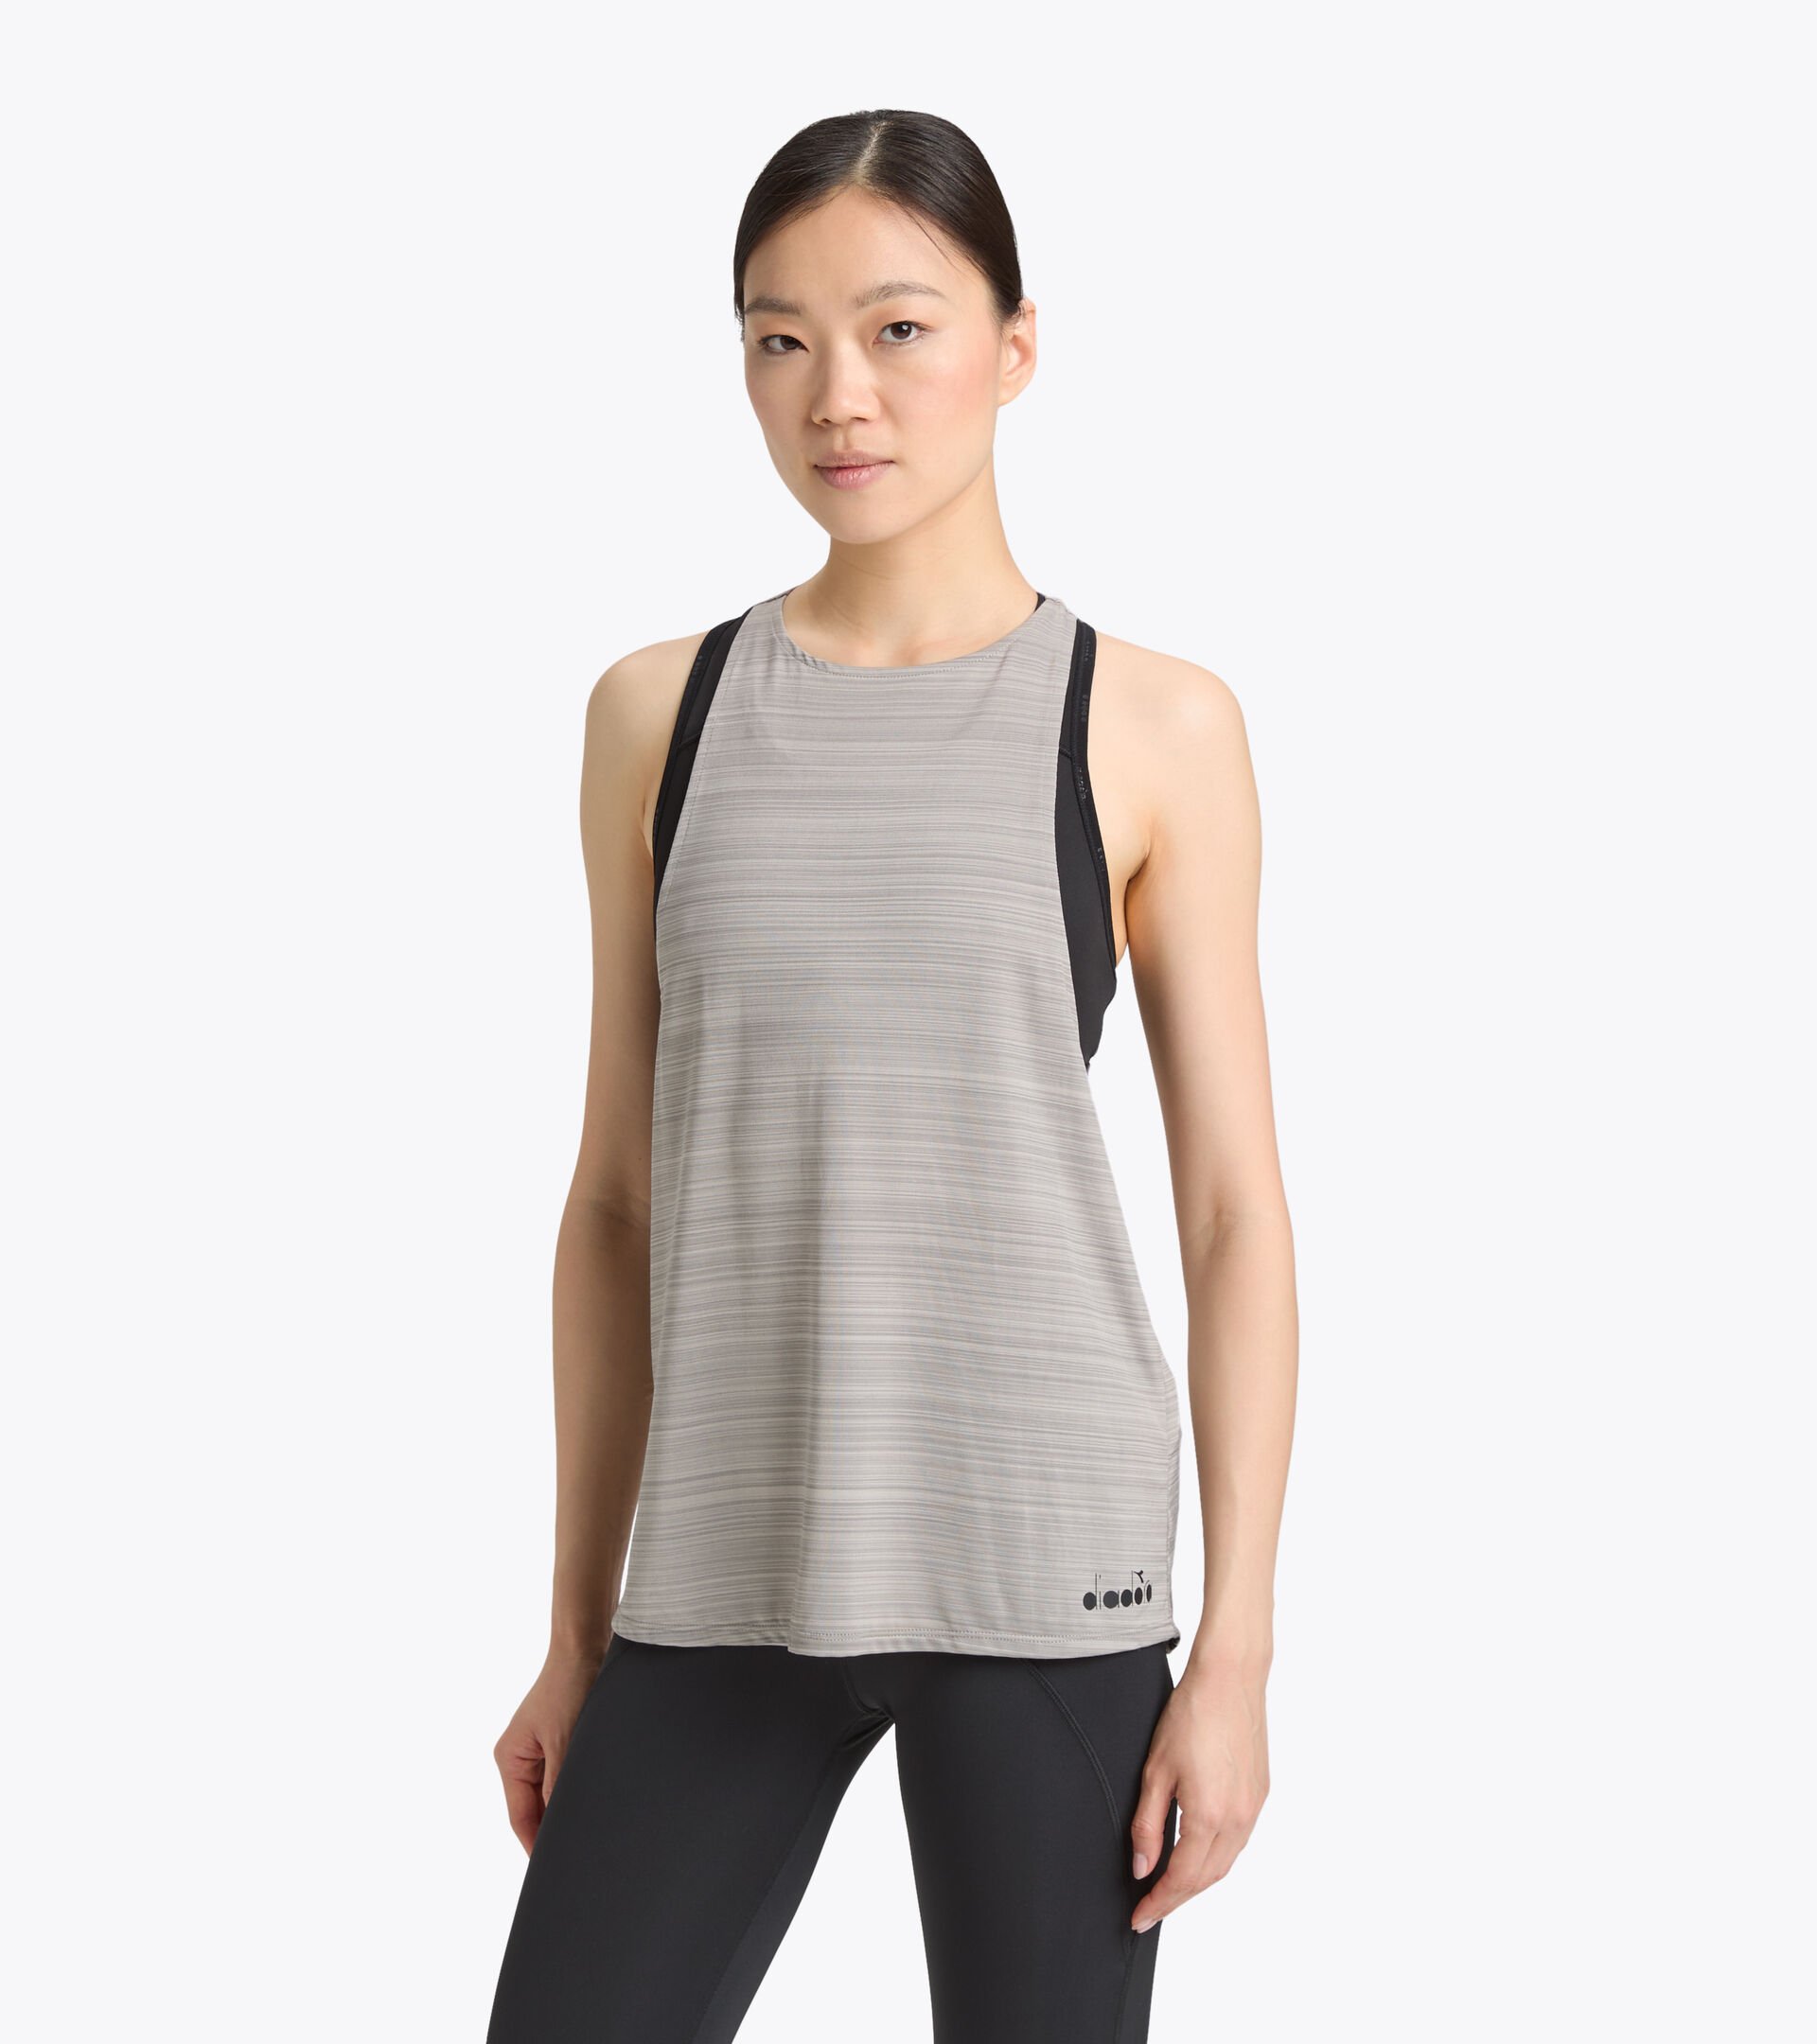 Training top and vest set - Women’s L. DOUBLE TANK BE ONE FT SILVER METALIZED - Diadora